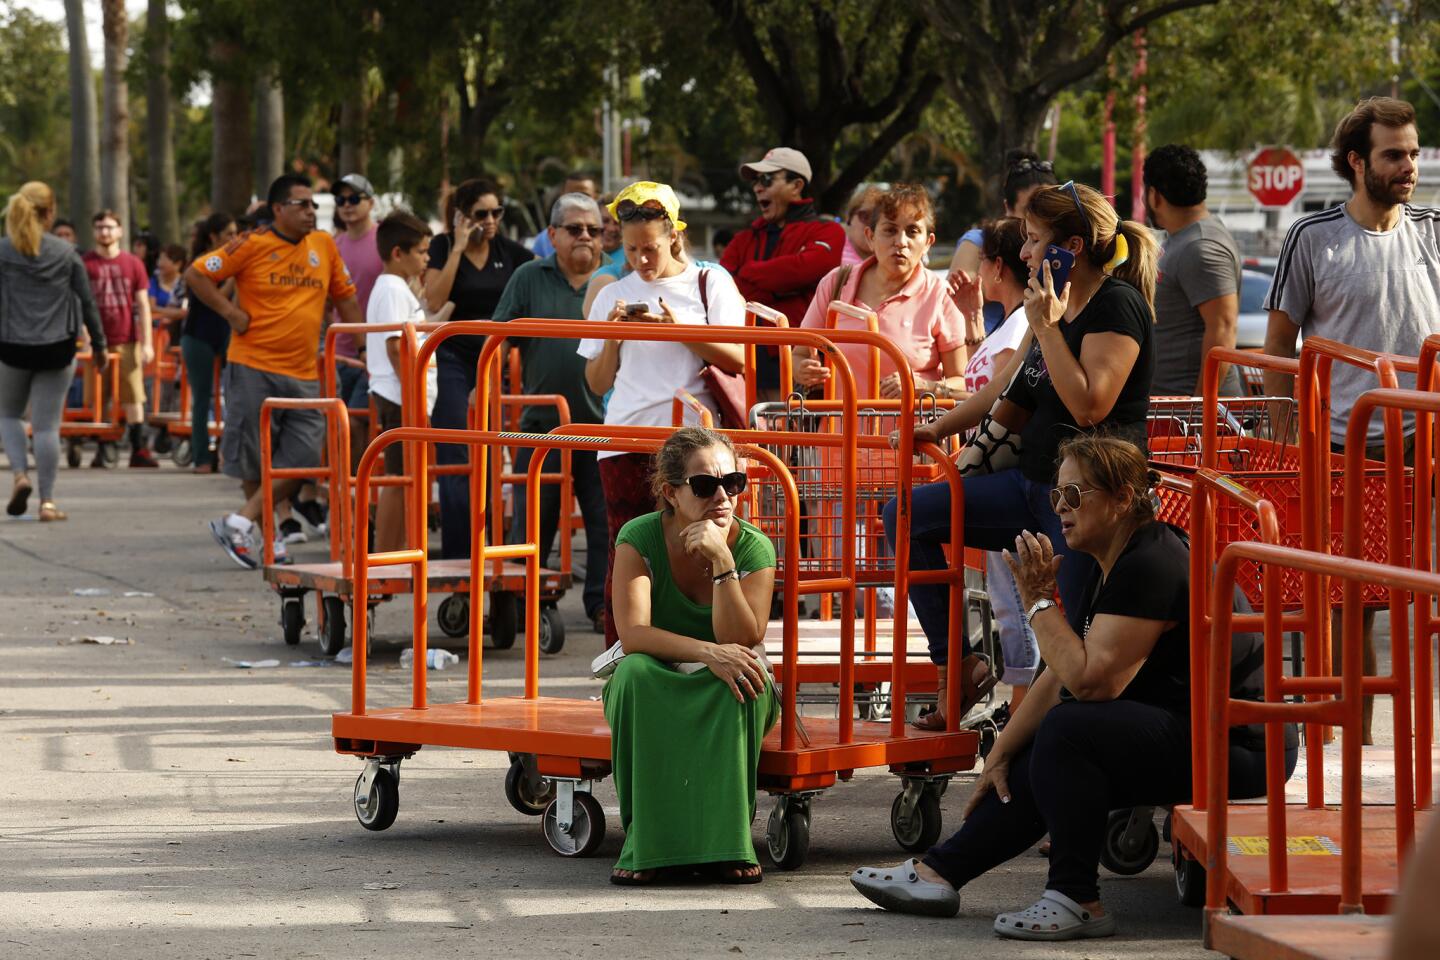 Rita Peummel, green dress, and hundreds of others wait in line Sept. 8, 2017, at Home Depot in Miami to get supplies to board up their homes ahead of Hurricane Irma. Police were on the scene to keep things orderly.